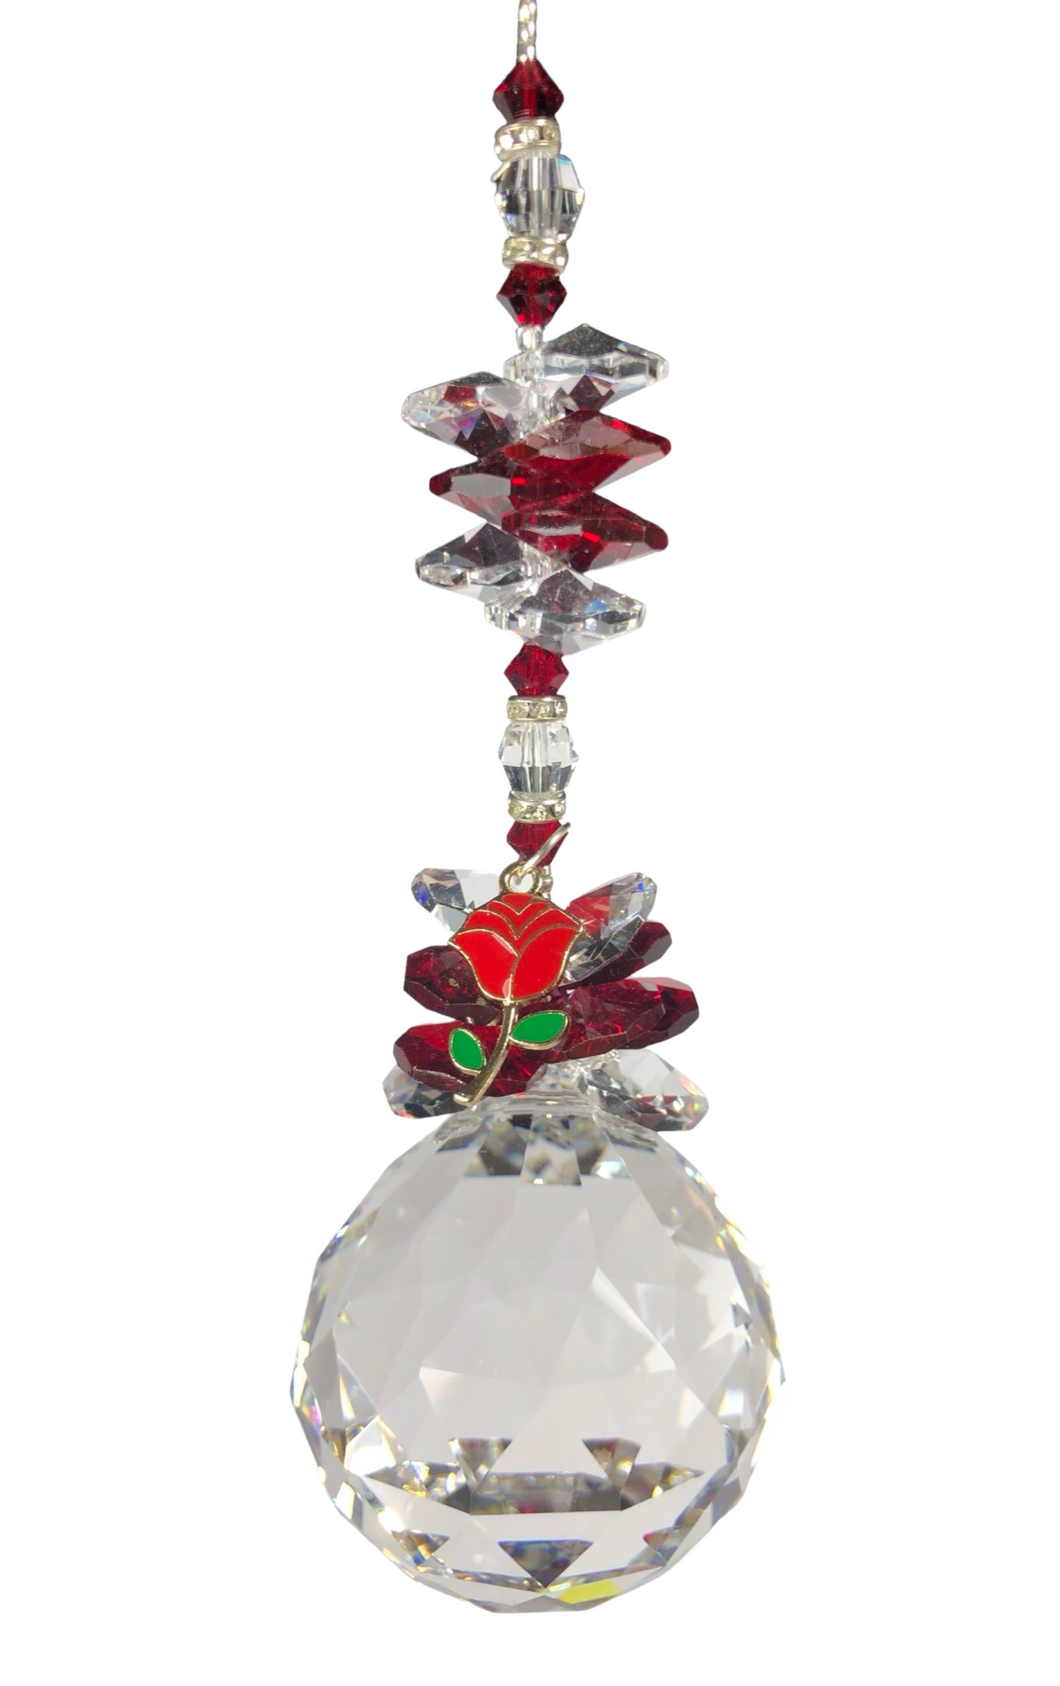 This beautiful Crystal ball suncatcher which is decorated with a Rose and Garnet